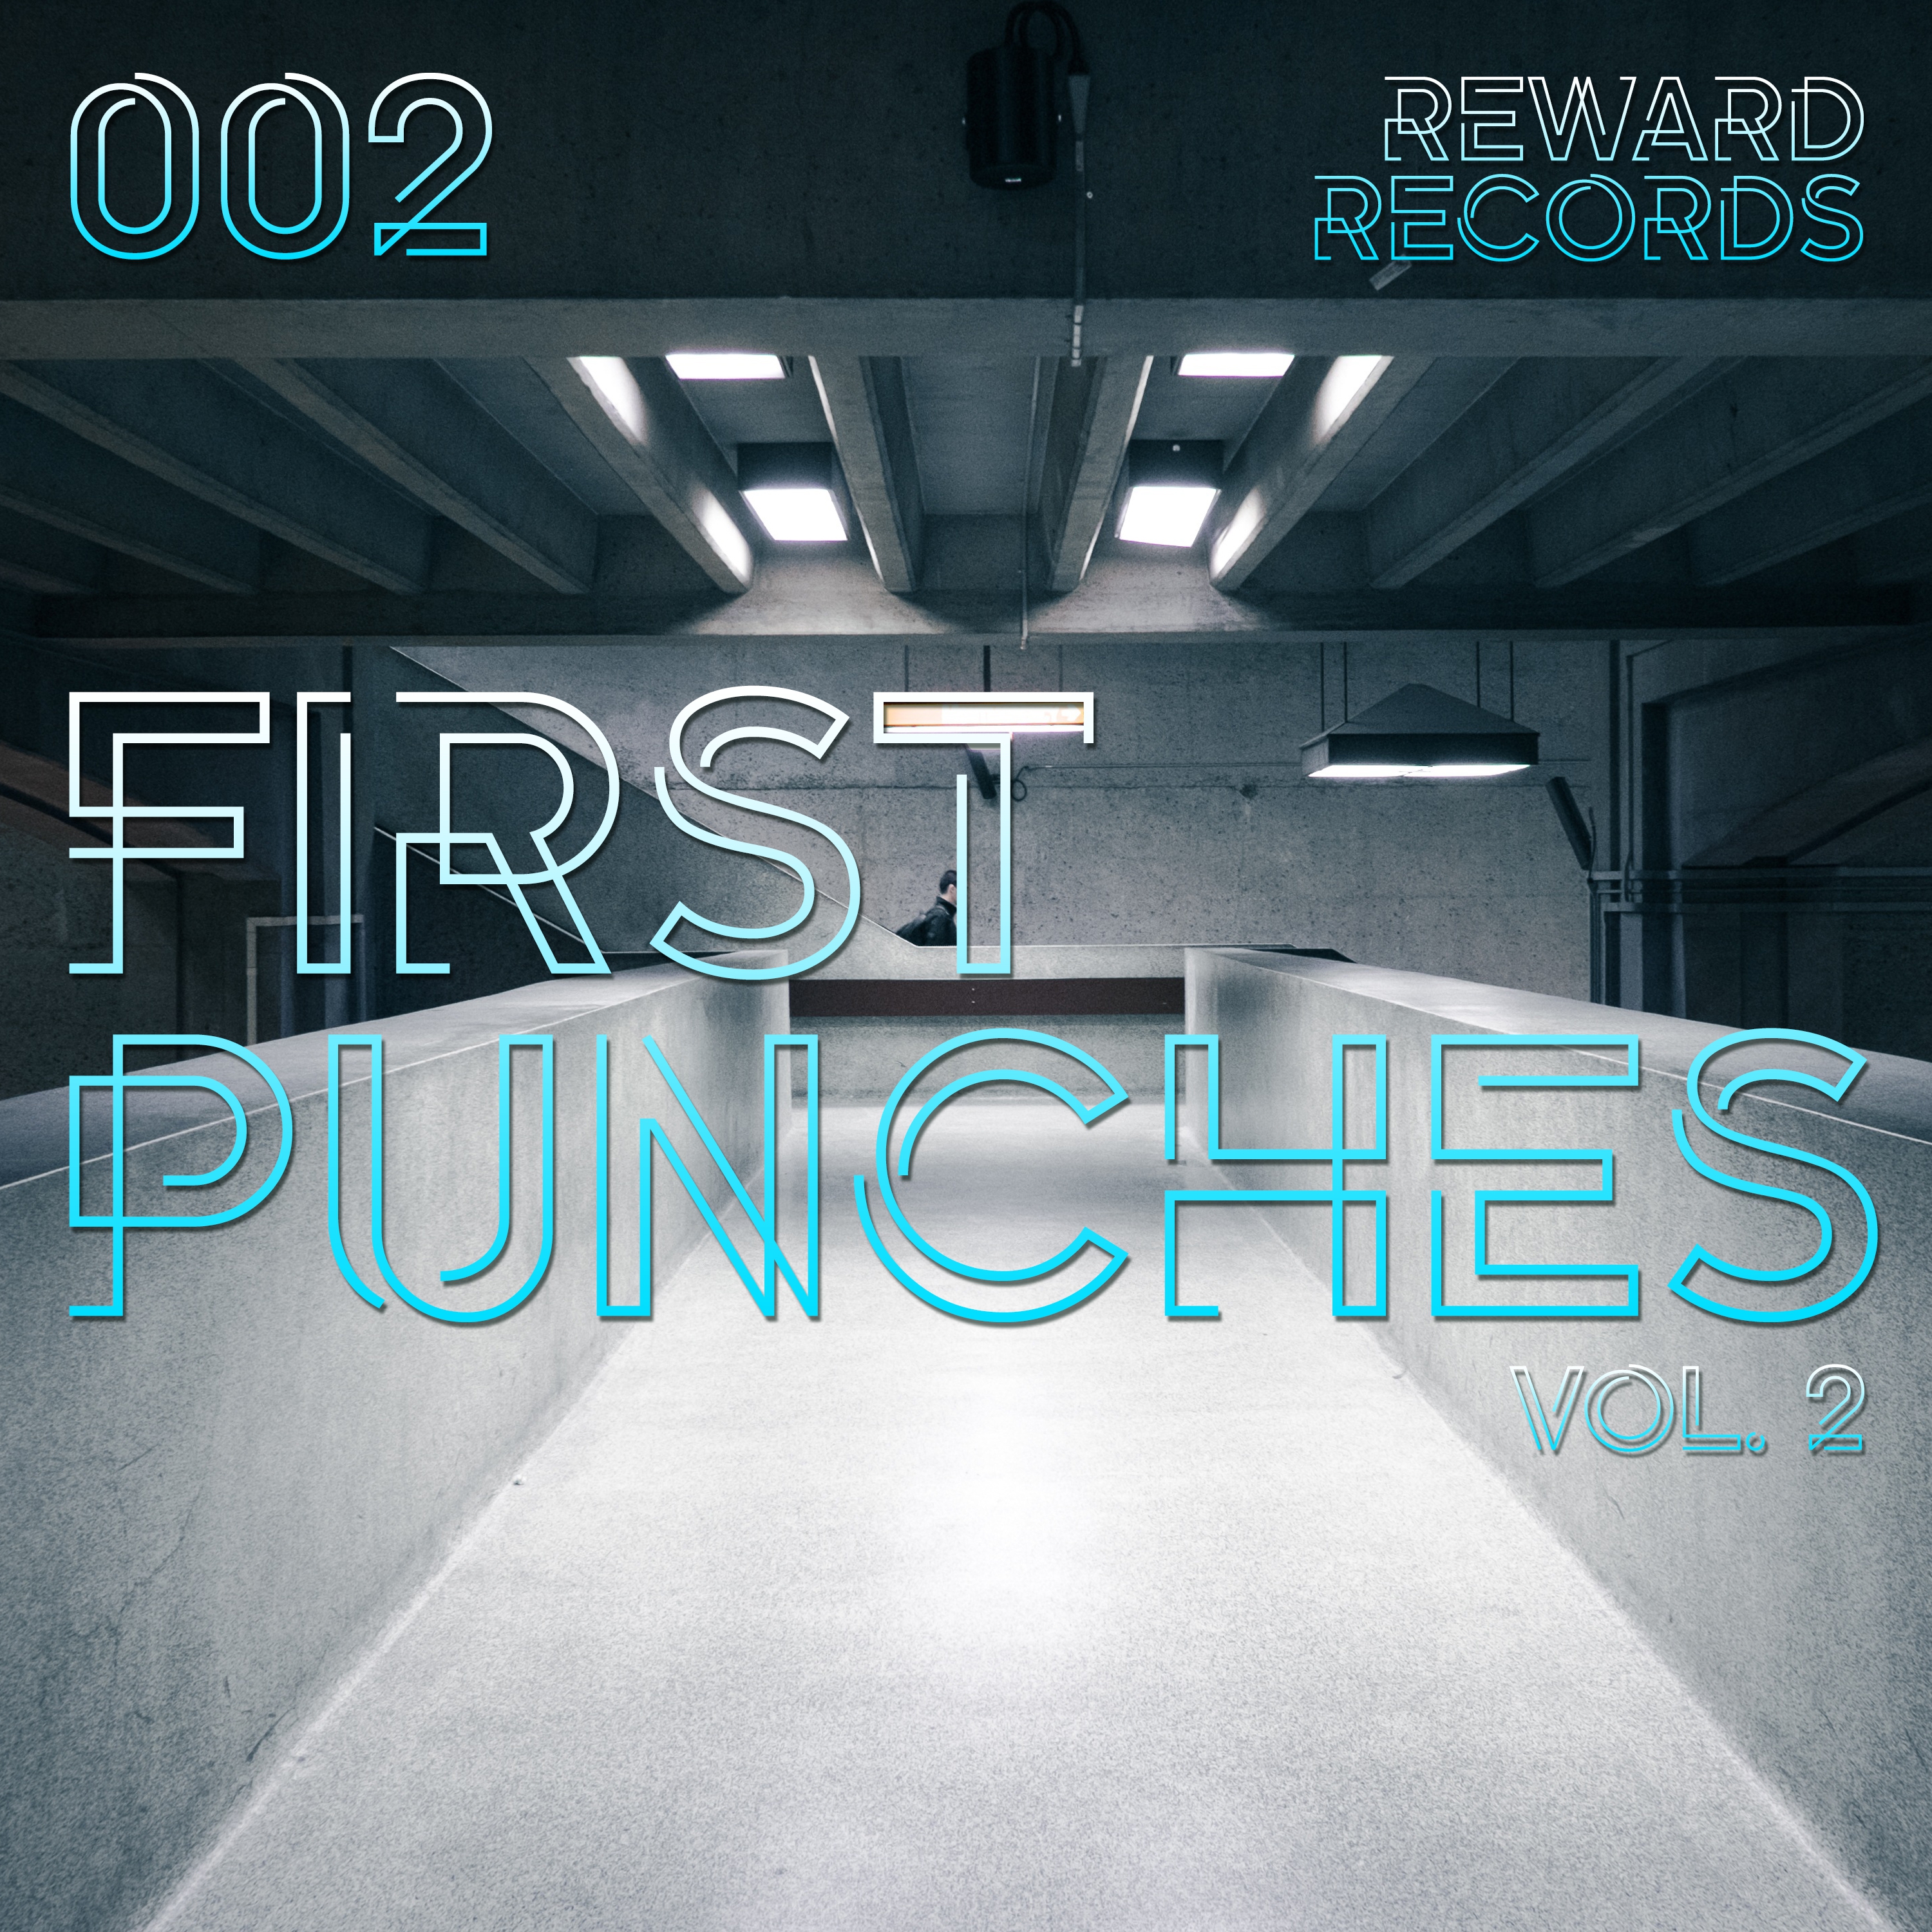 First Punches, Vol. 2